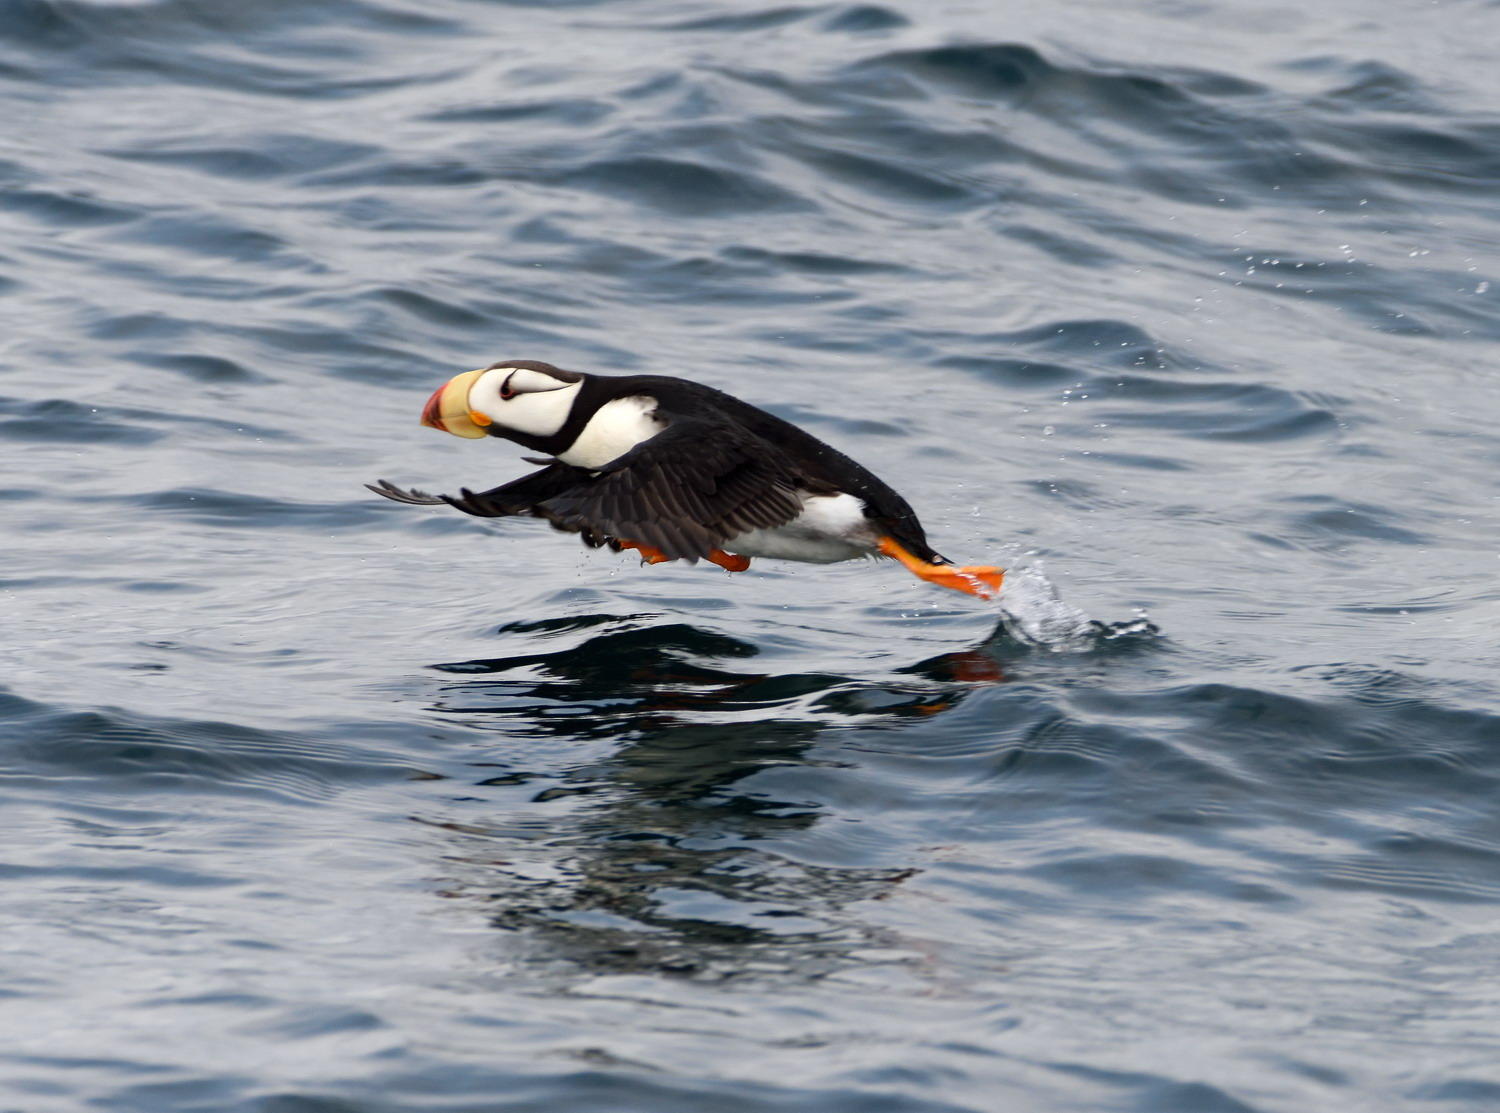 DSC_8263_1A1 - Tufted Puffin